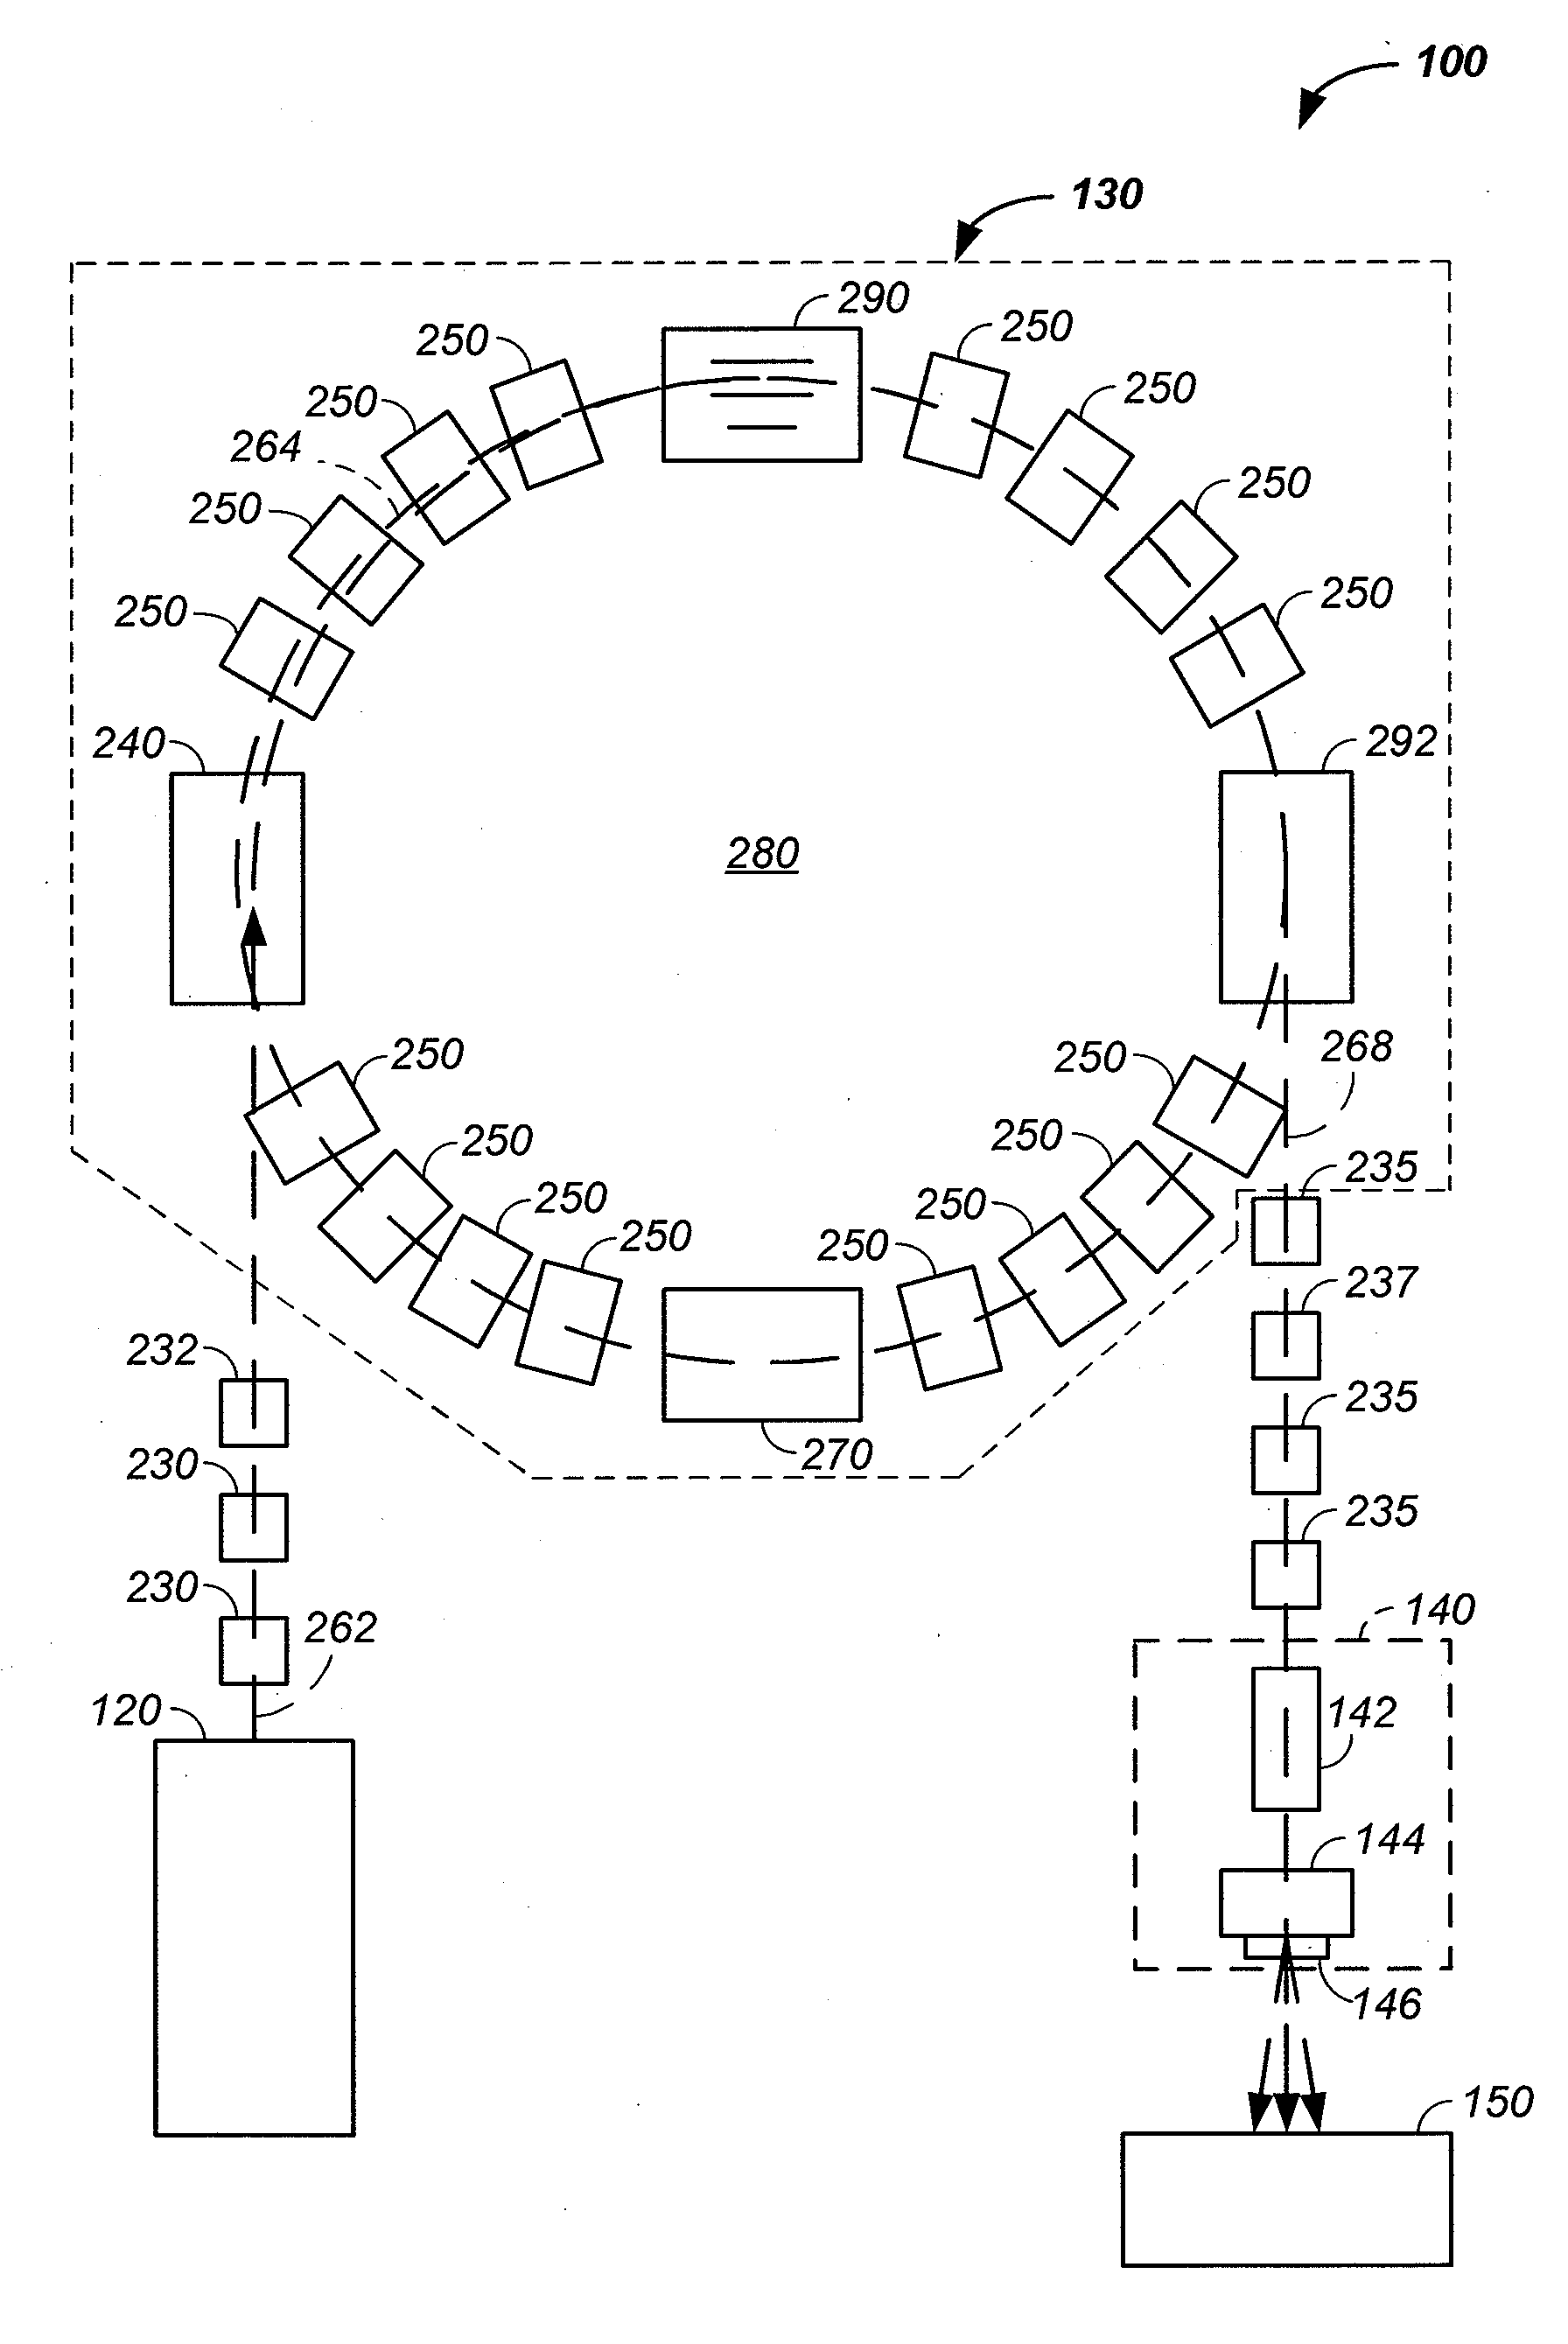 Charged particle beam acceleration method and apparatus as part of a charged particle cancer therapy system